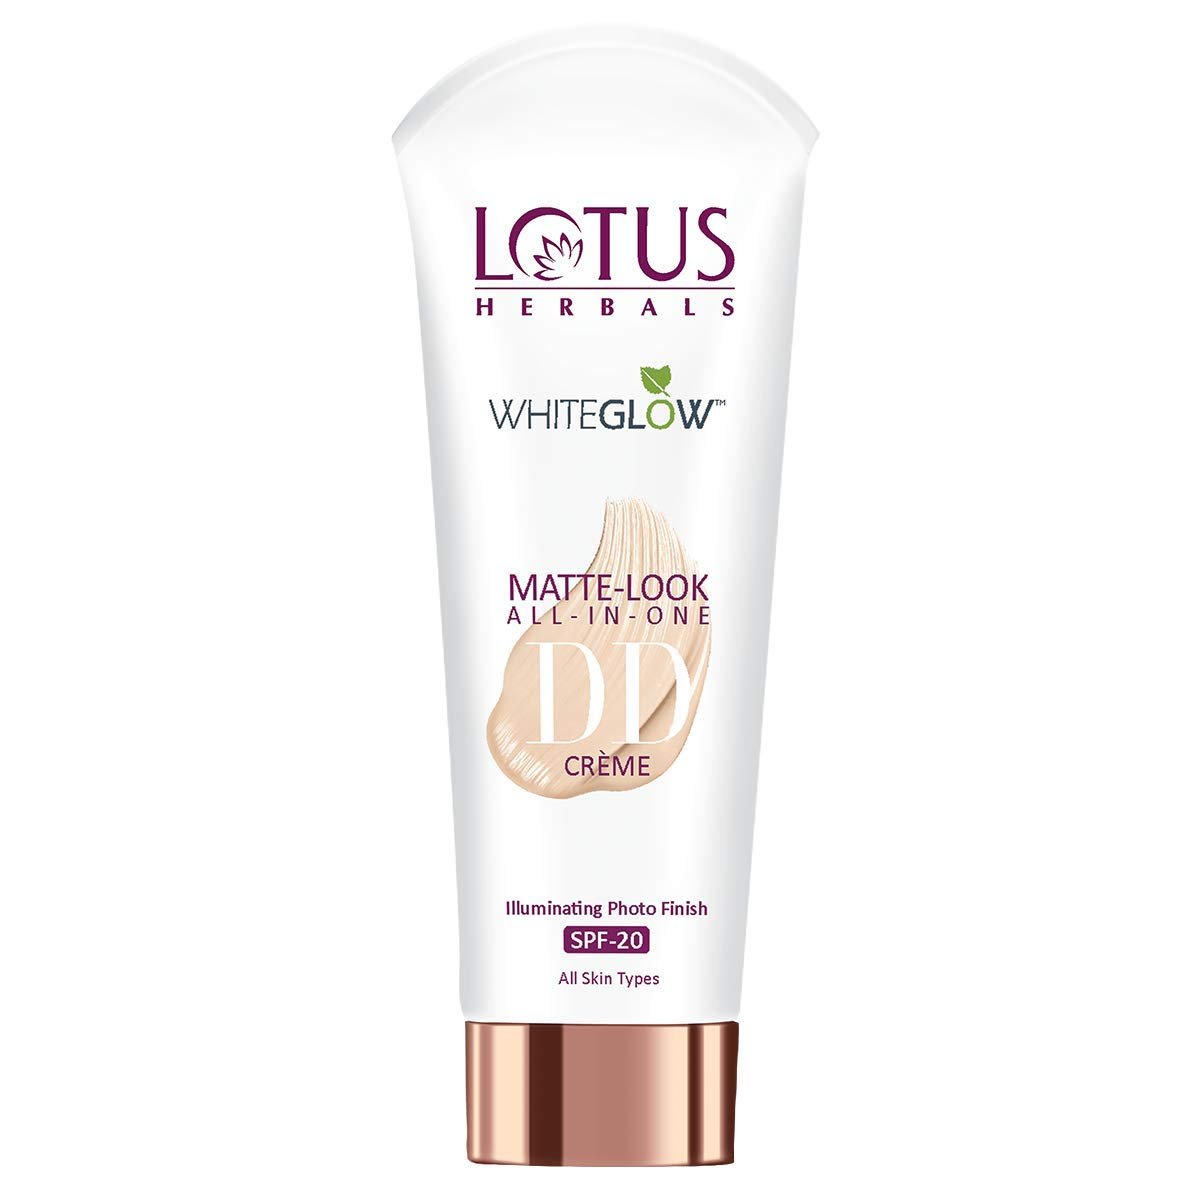 Lotus Herbals Whiteglow Matte Look All In One day cream 30 gm